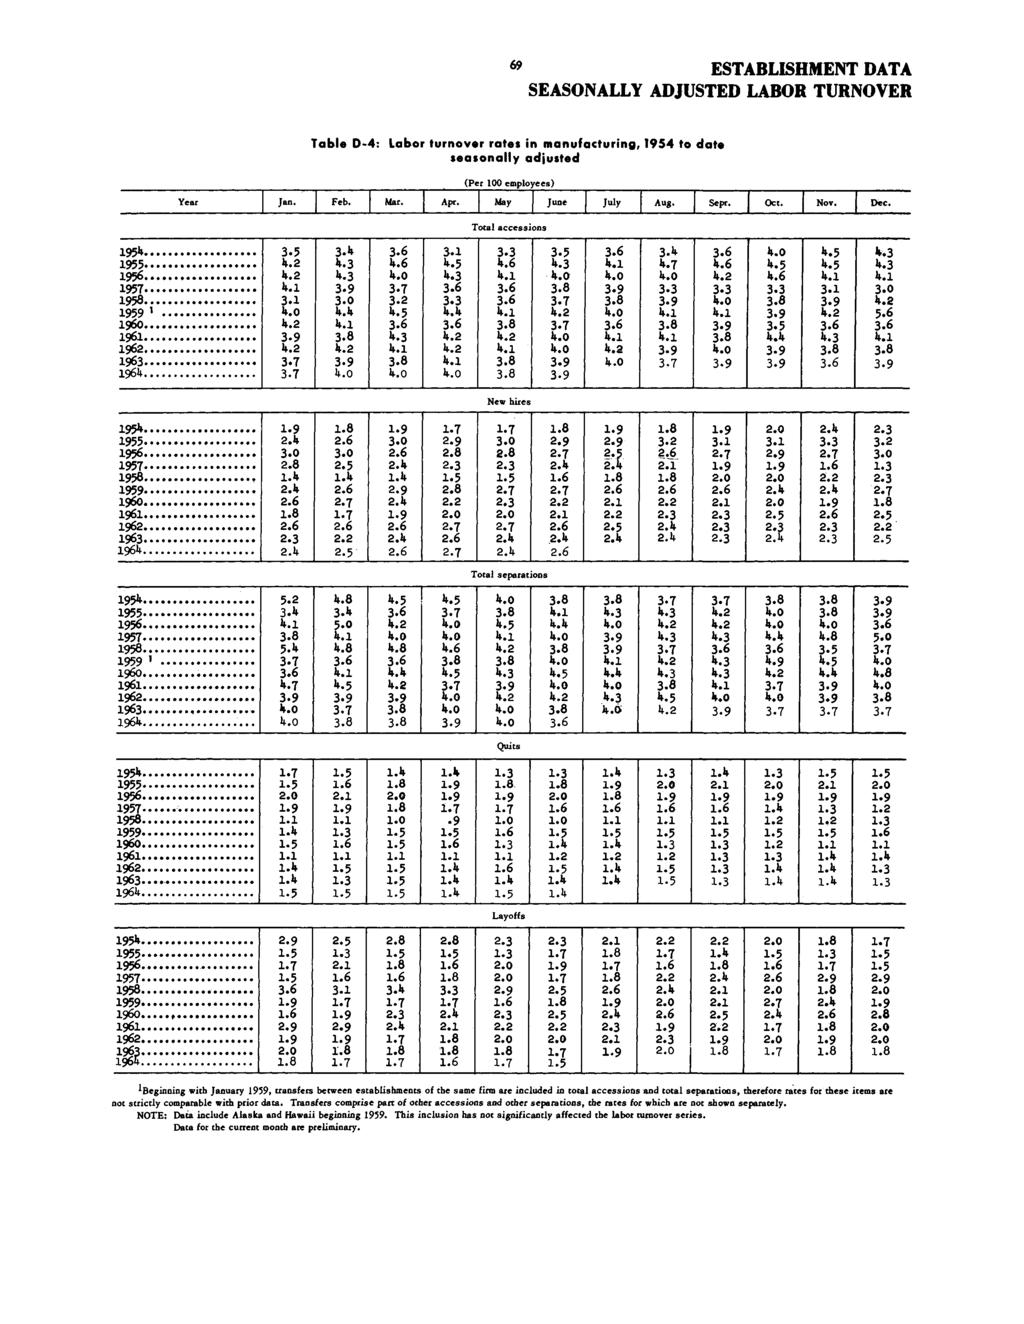 69 SEASONALLY ADJUSTED LABOR TURNOVER Table D-4: Labor turnover rates in manufacturing, 1954 to date seasonally adjusted (Per 100 employees) Jan. Apr. Aug. Sept. Oct. Dec.